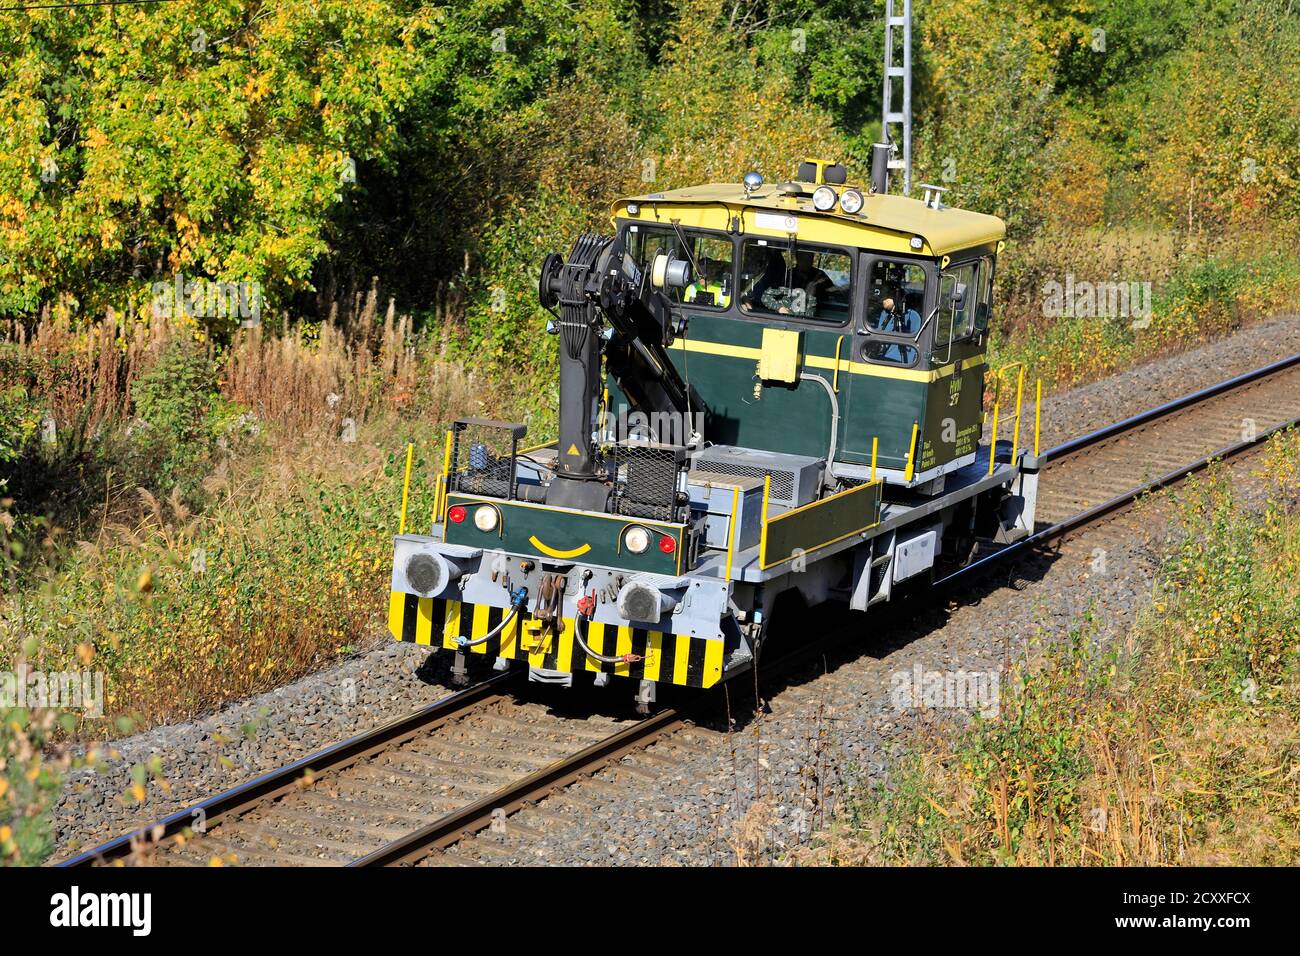 Tka7 On-Track-Machine No 217 on the move. 80 Tka7 were manufactured by Valmet in 1977-93, numbered 168–247. Salo, Finland. September 27, 2020. Stock Photo